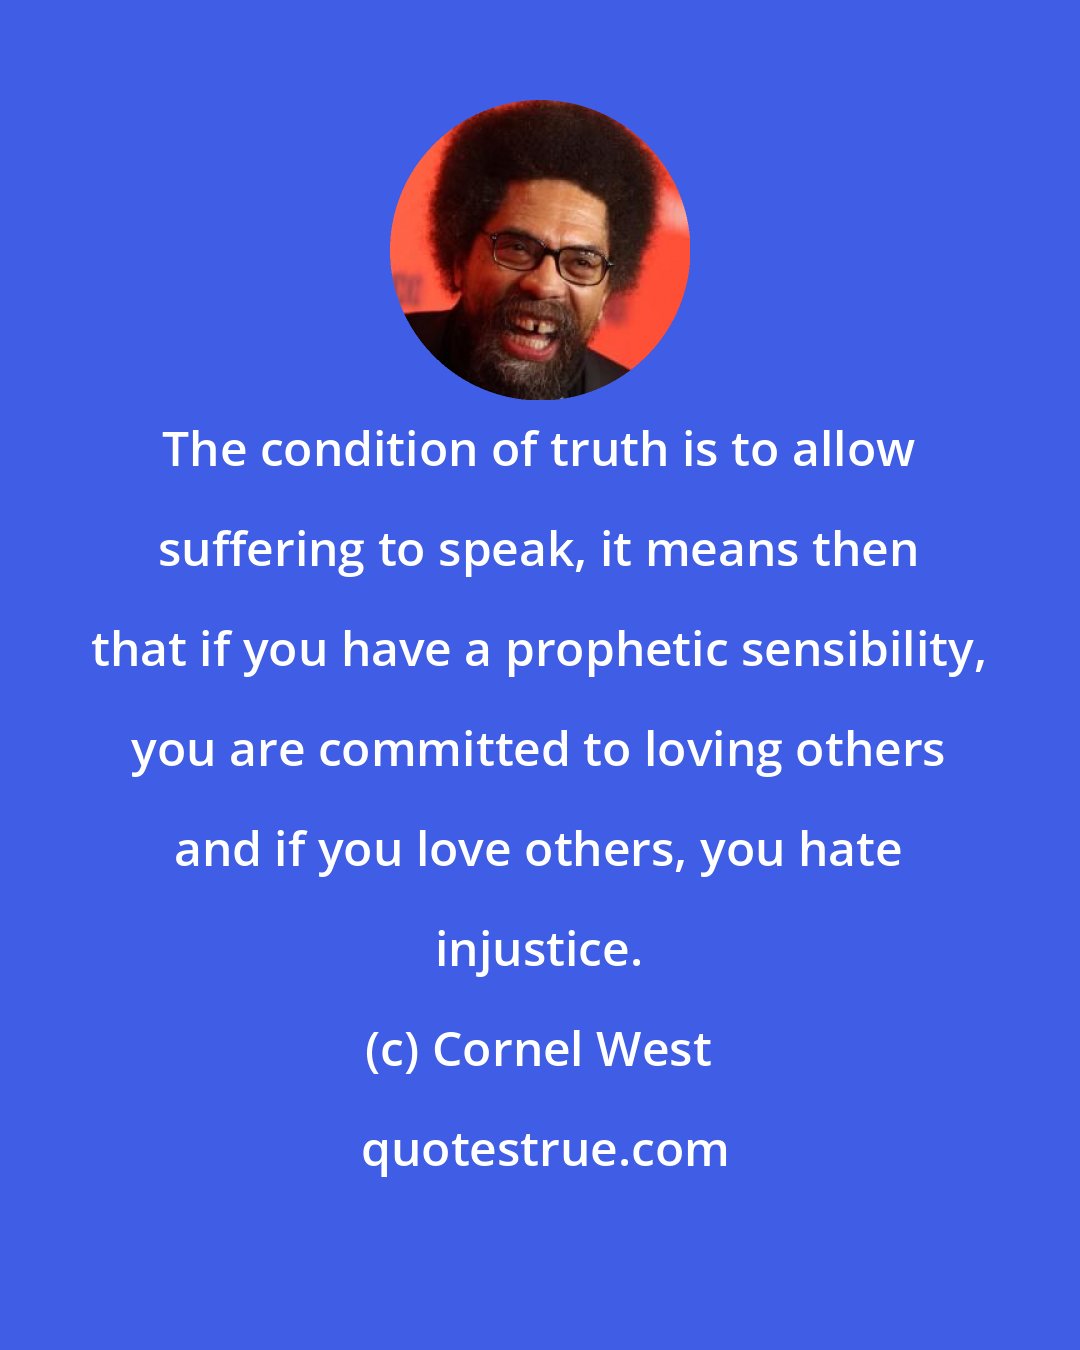 Cornel West: The condition of truth is to allow suffering to speak, it means then that if you have a prophetic sensibility, you are committed to loving others and if you love others, you hate injustice.